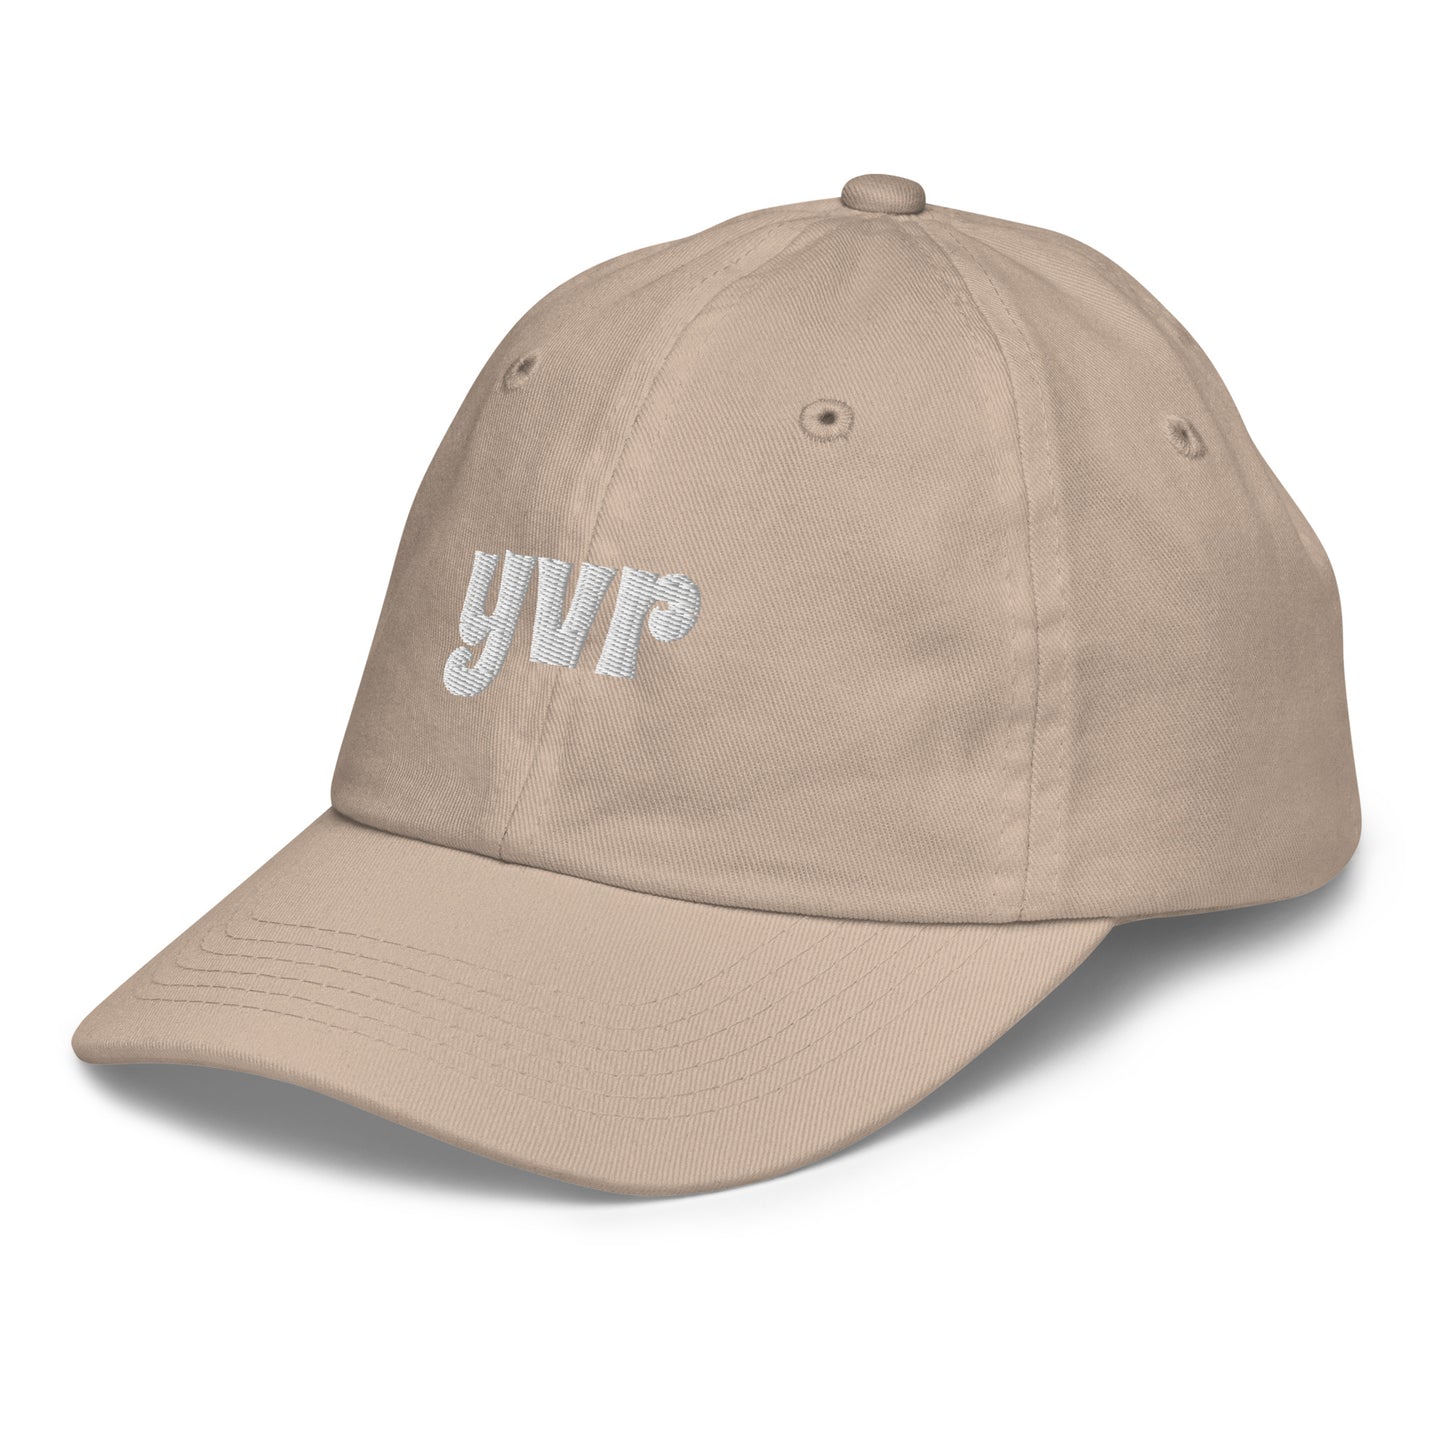 Groovy Kid's Baseball Cap - White • YVR Vancouver • YHM Designs - Image 22